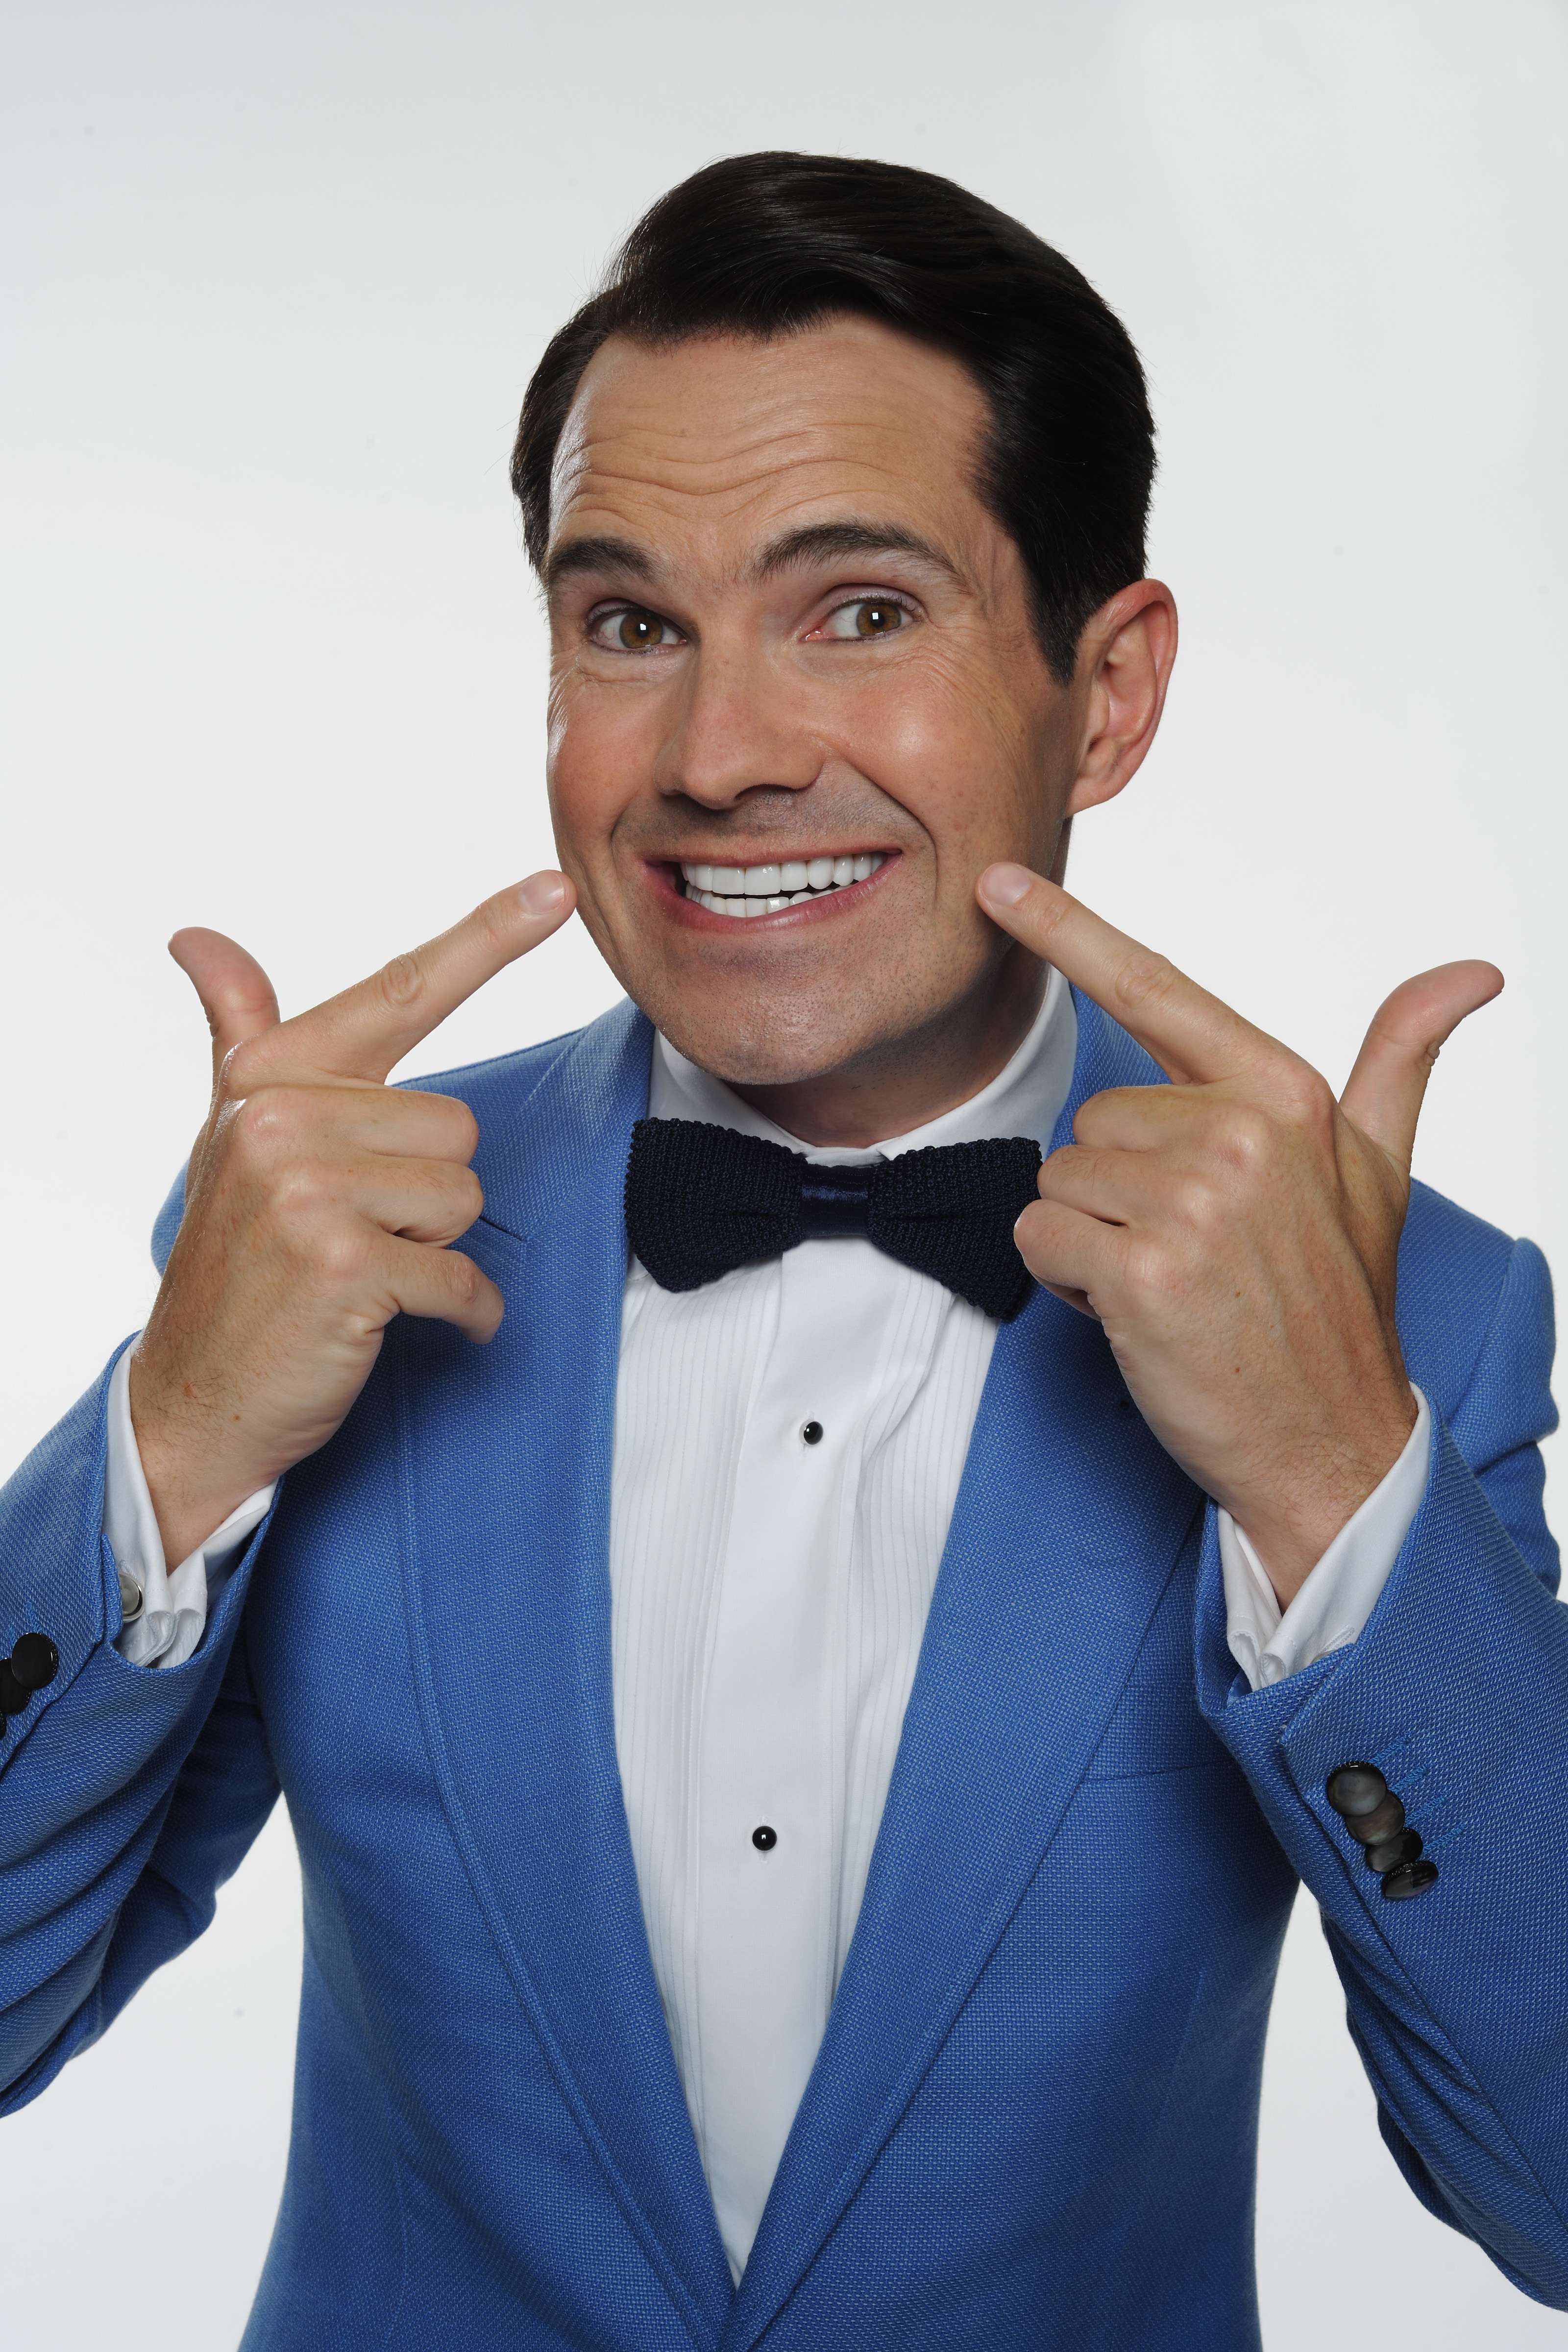 Jimmy Carr will be firing off his inimical one-liners at King George V School.